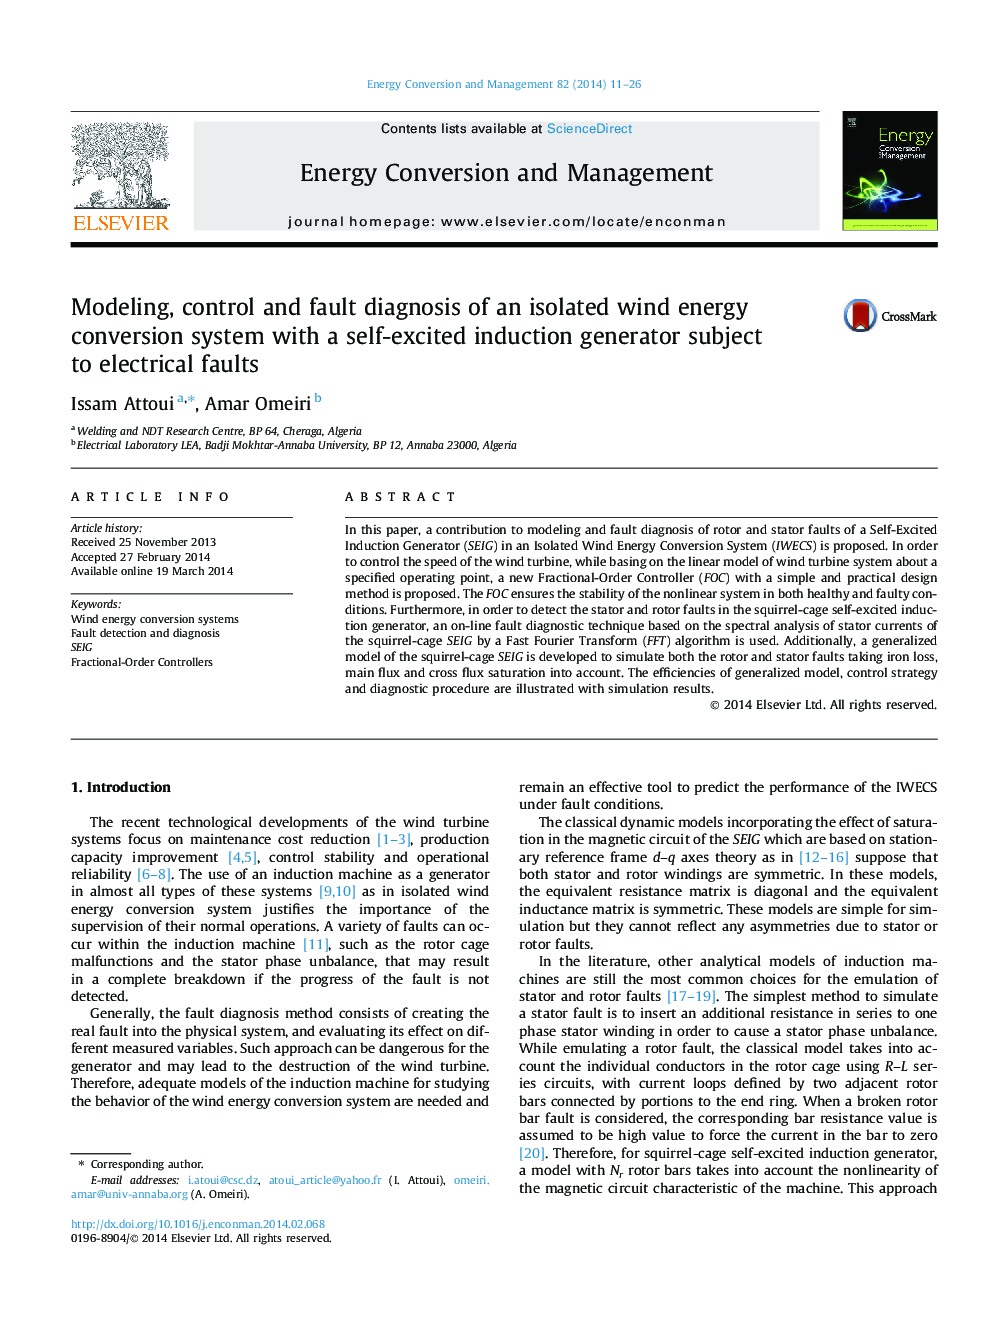 Modeling, control and fault diagnosis of an isolated wind energy conversion system with a self-excited induction generator subject to electrical faults